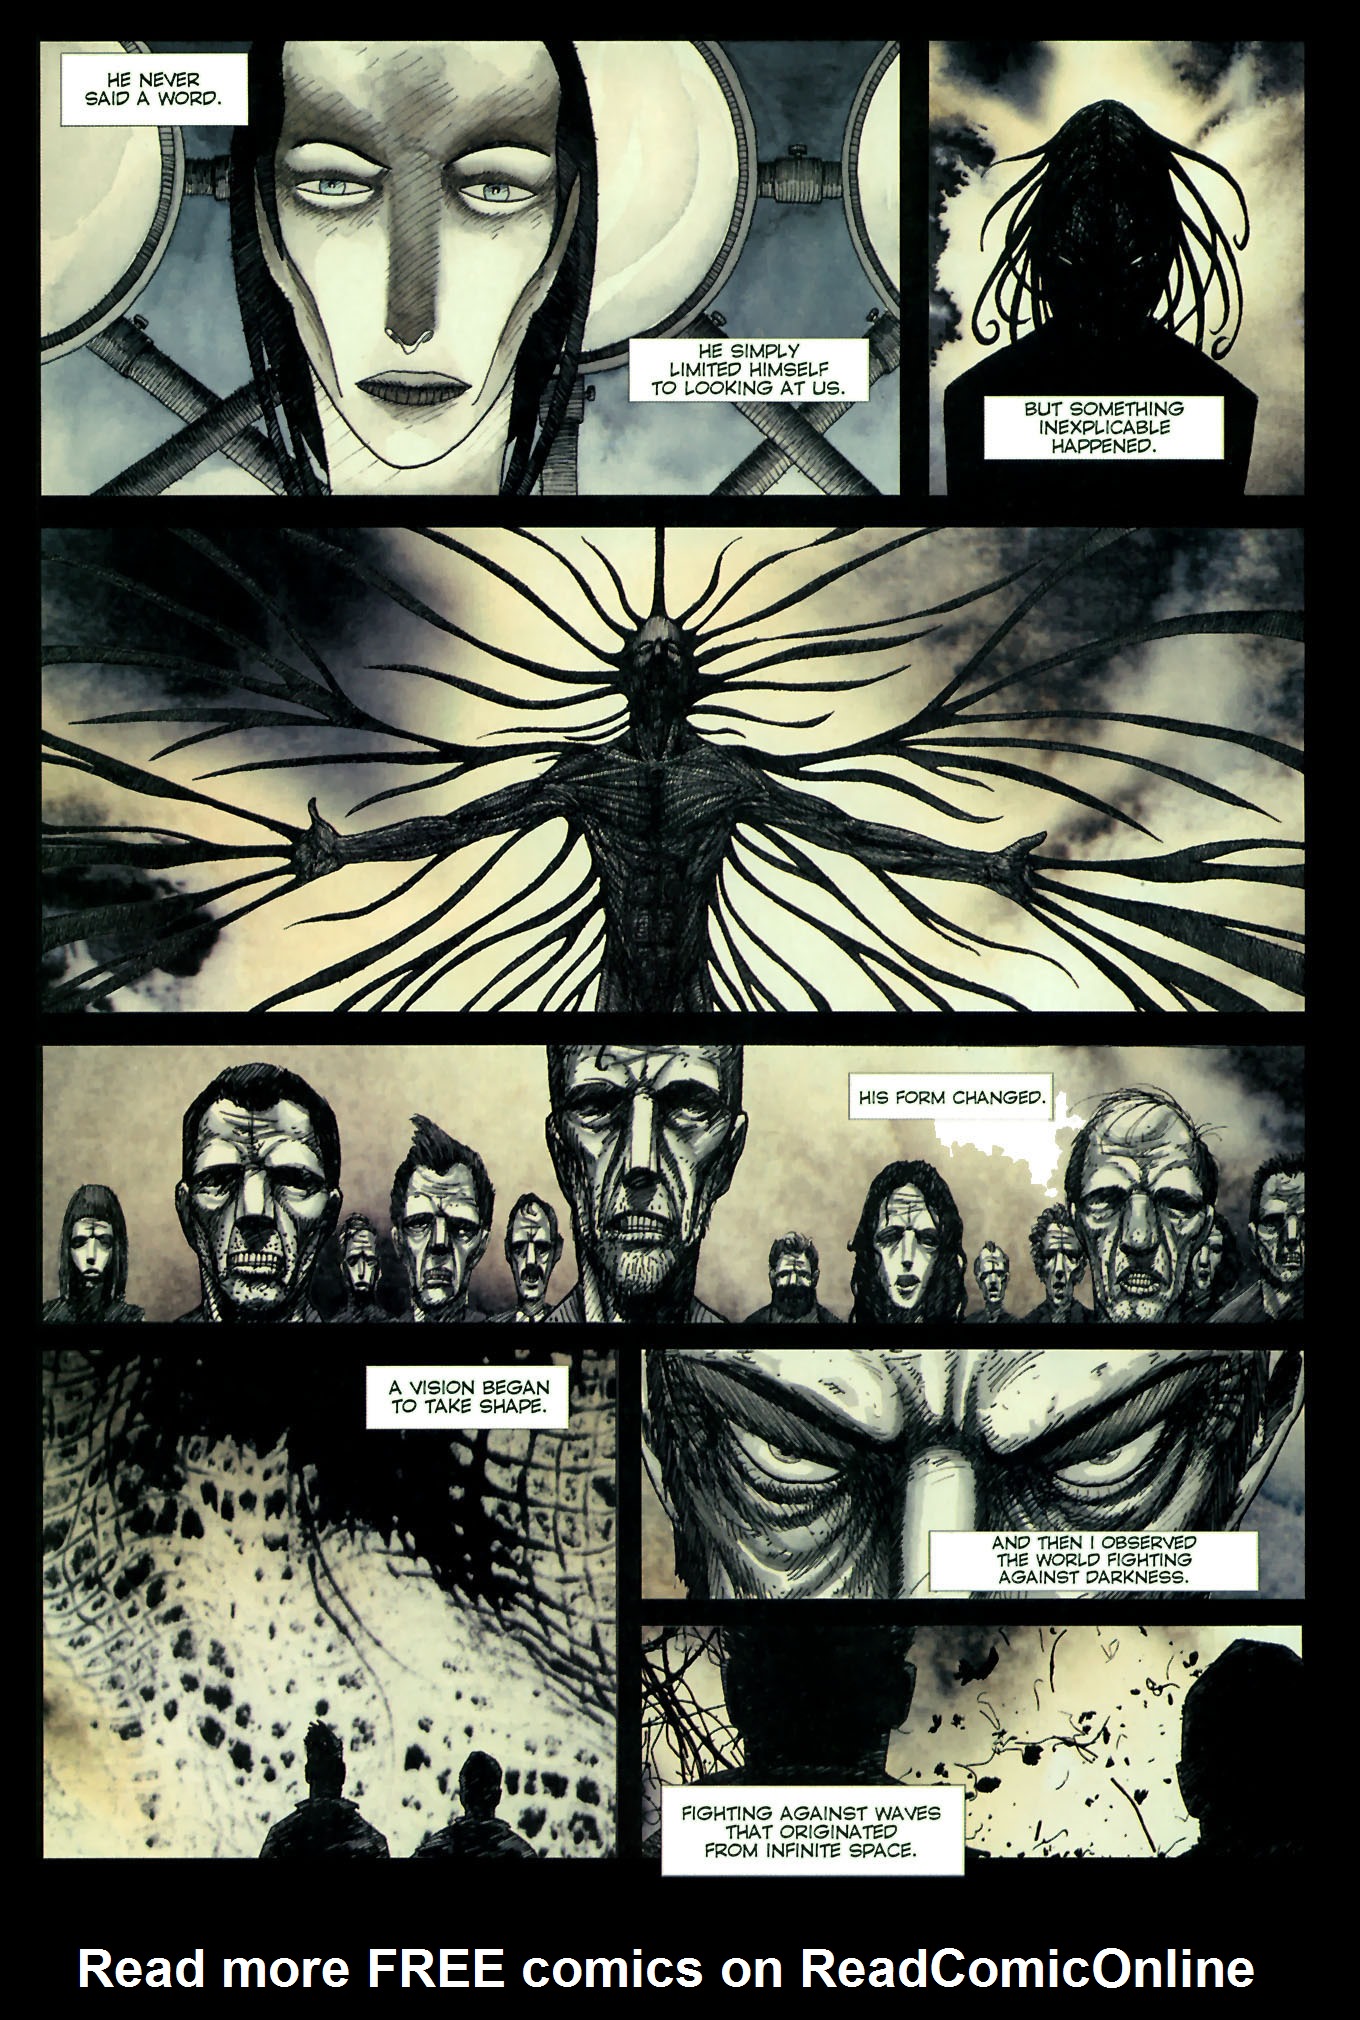 Read online H.P. Lovecraft - The Temple comic -  Issue # Full - 40